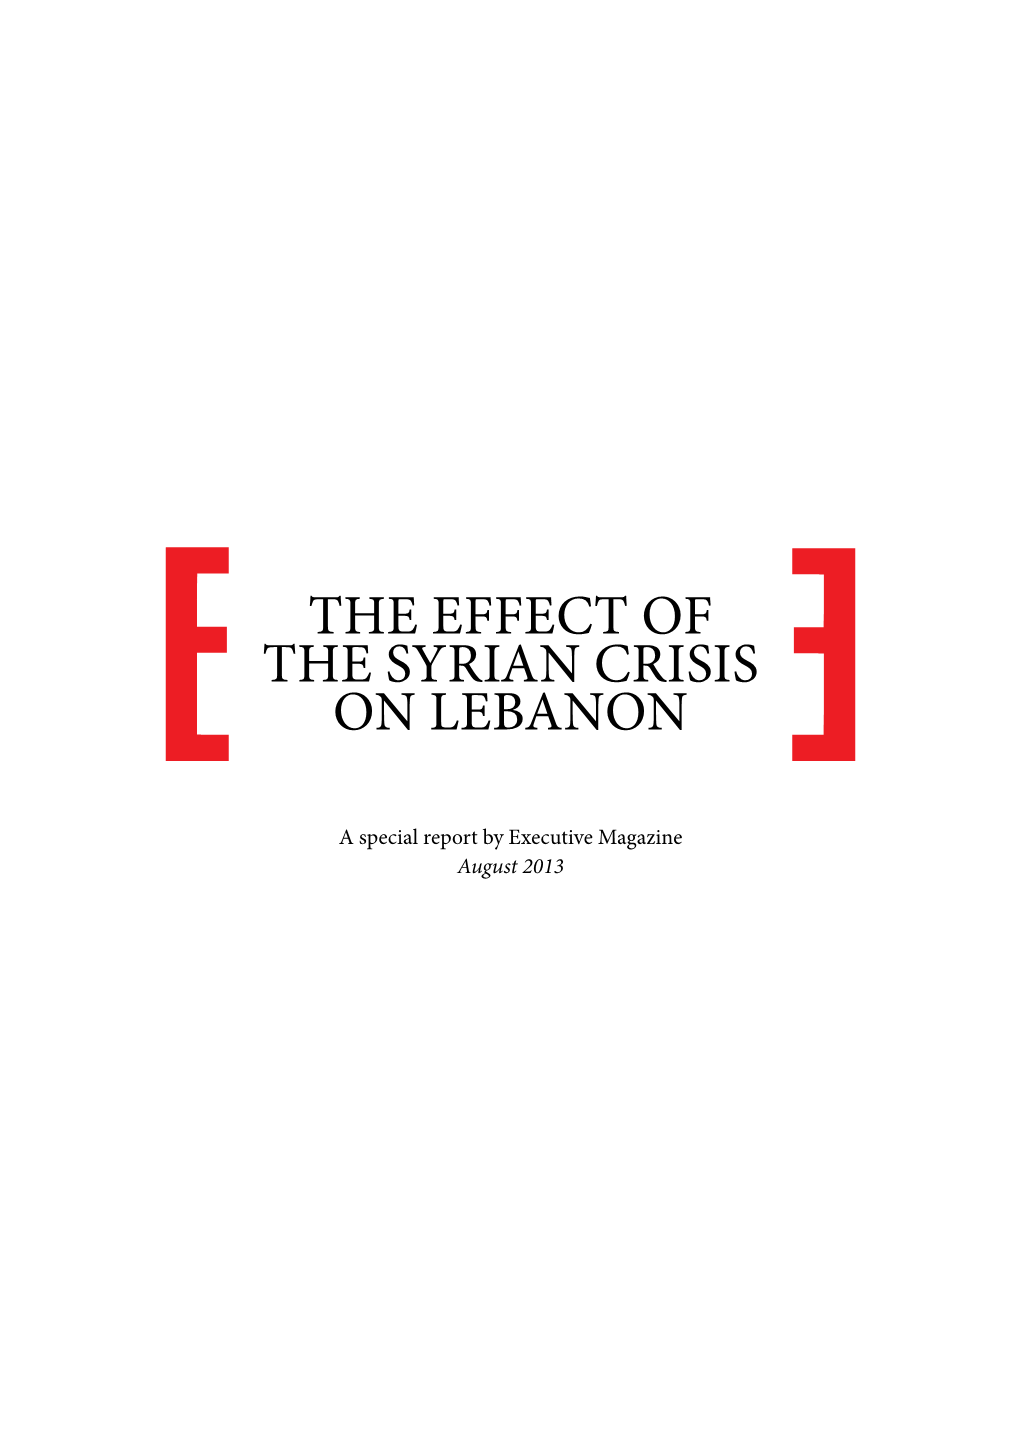 The Effect of the Syrian Crisis on Lebanon